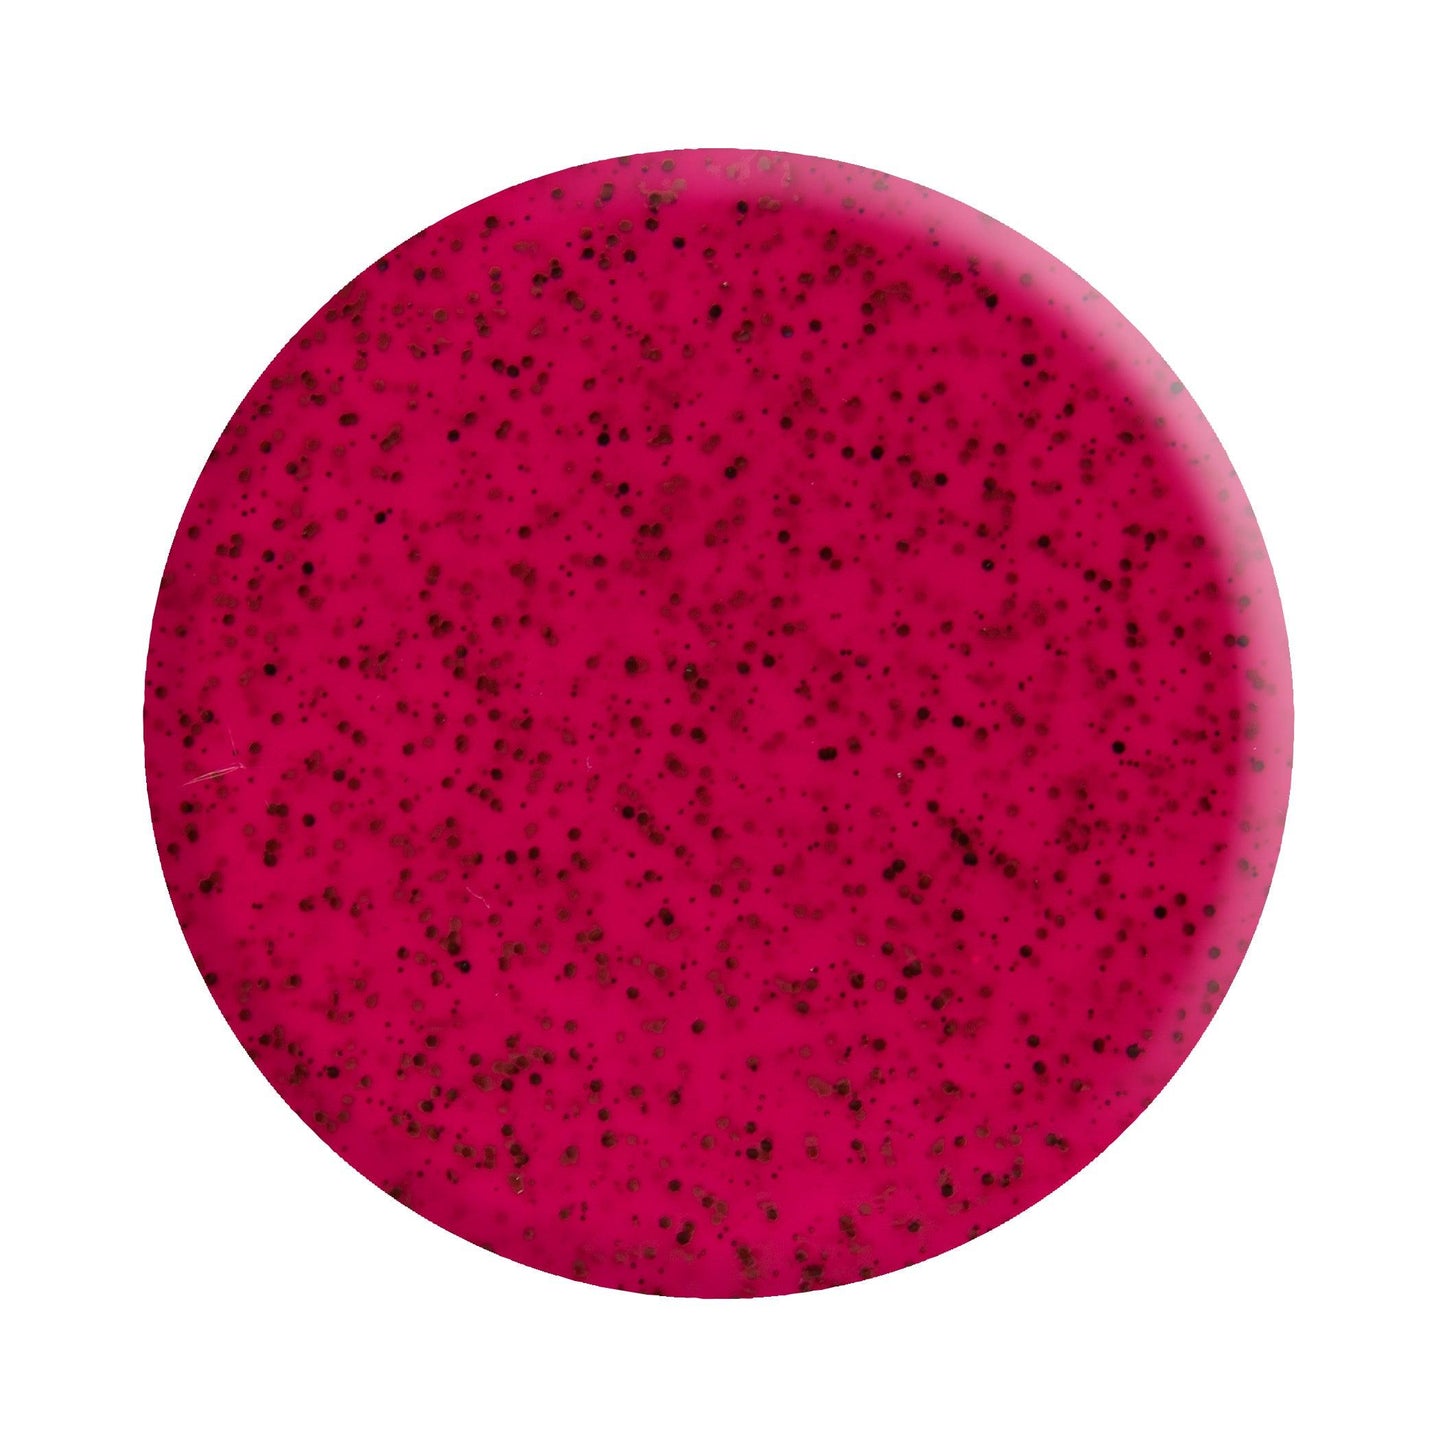 Speckled Pattern Breathable Halal Nail Polish - Water-melon with You? - SE10 - LENA NAIL POLISH DIRECT